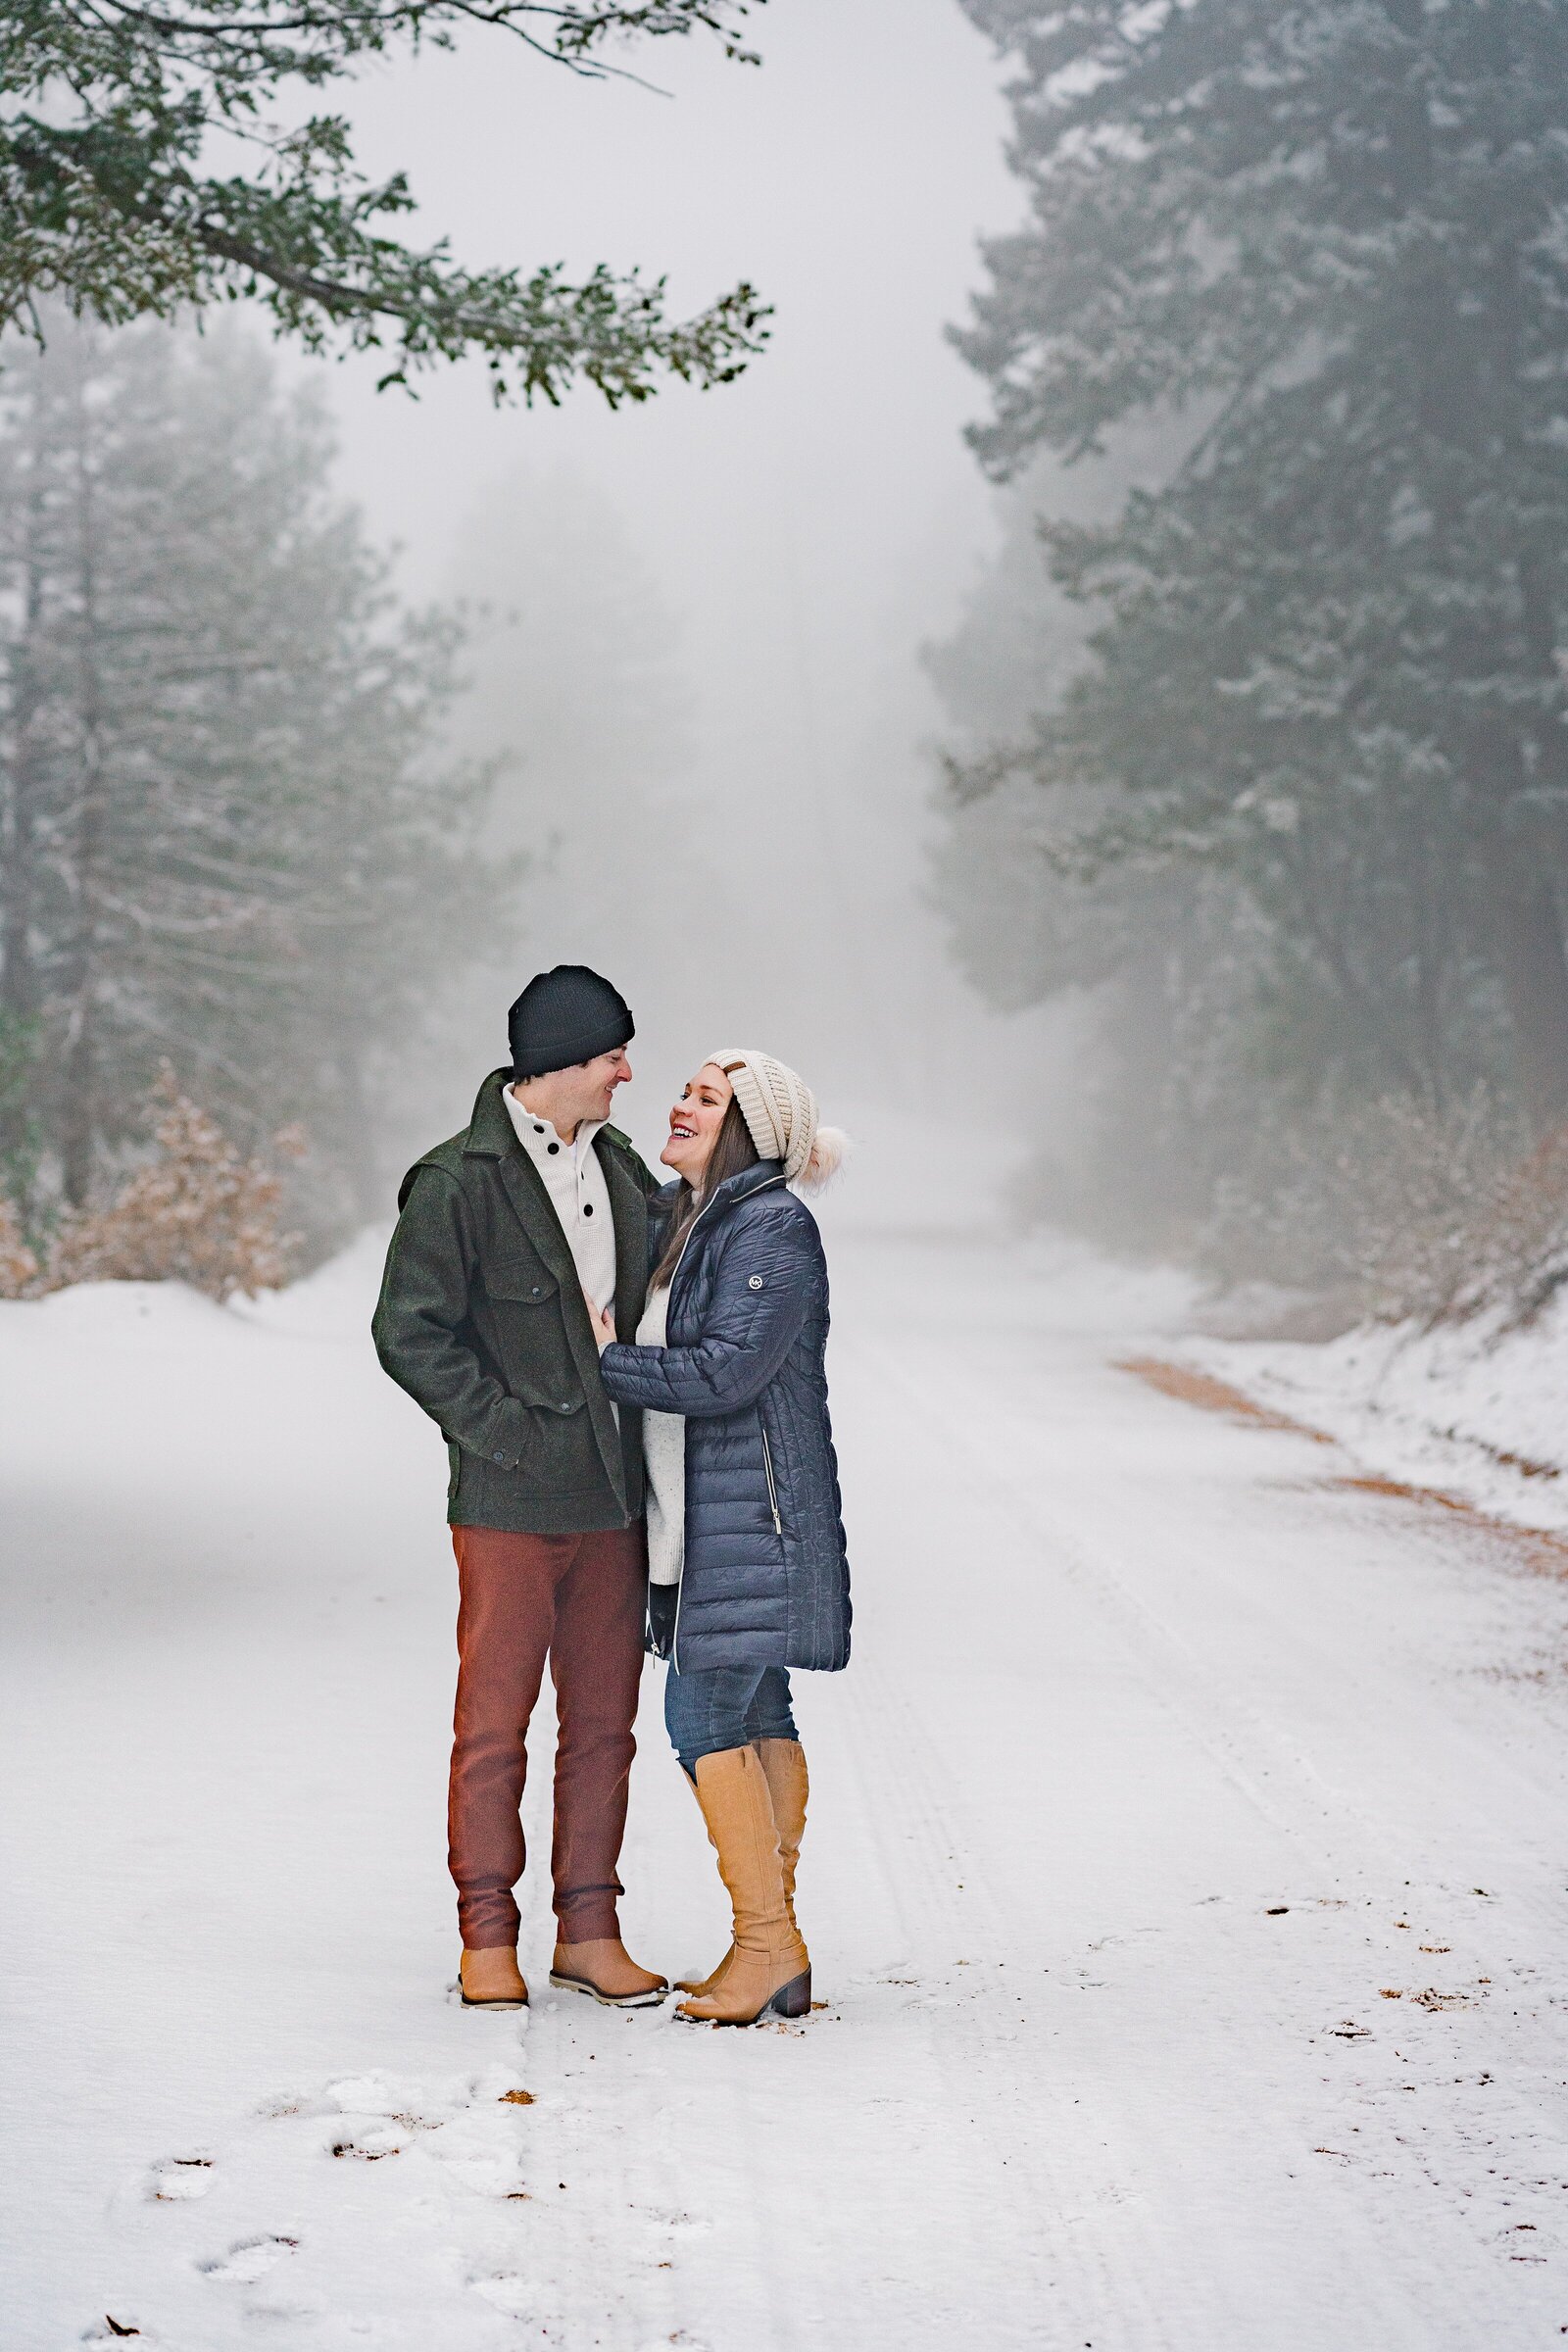 Embrace the thrill of your love story with Samantha Immer Photography, your trusted Colorado elopement photographer. We'll journey into the Rocky Mountains and capture your authentic love in candid and adventurous elopement photos.